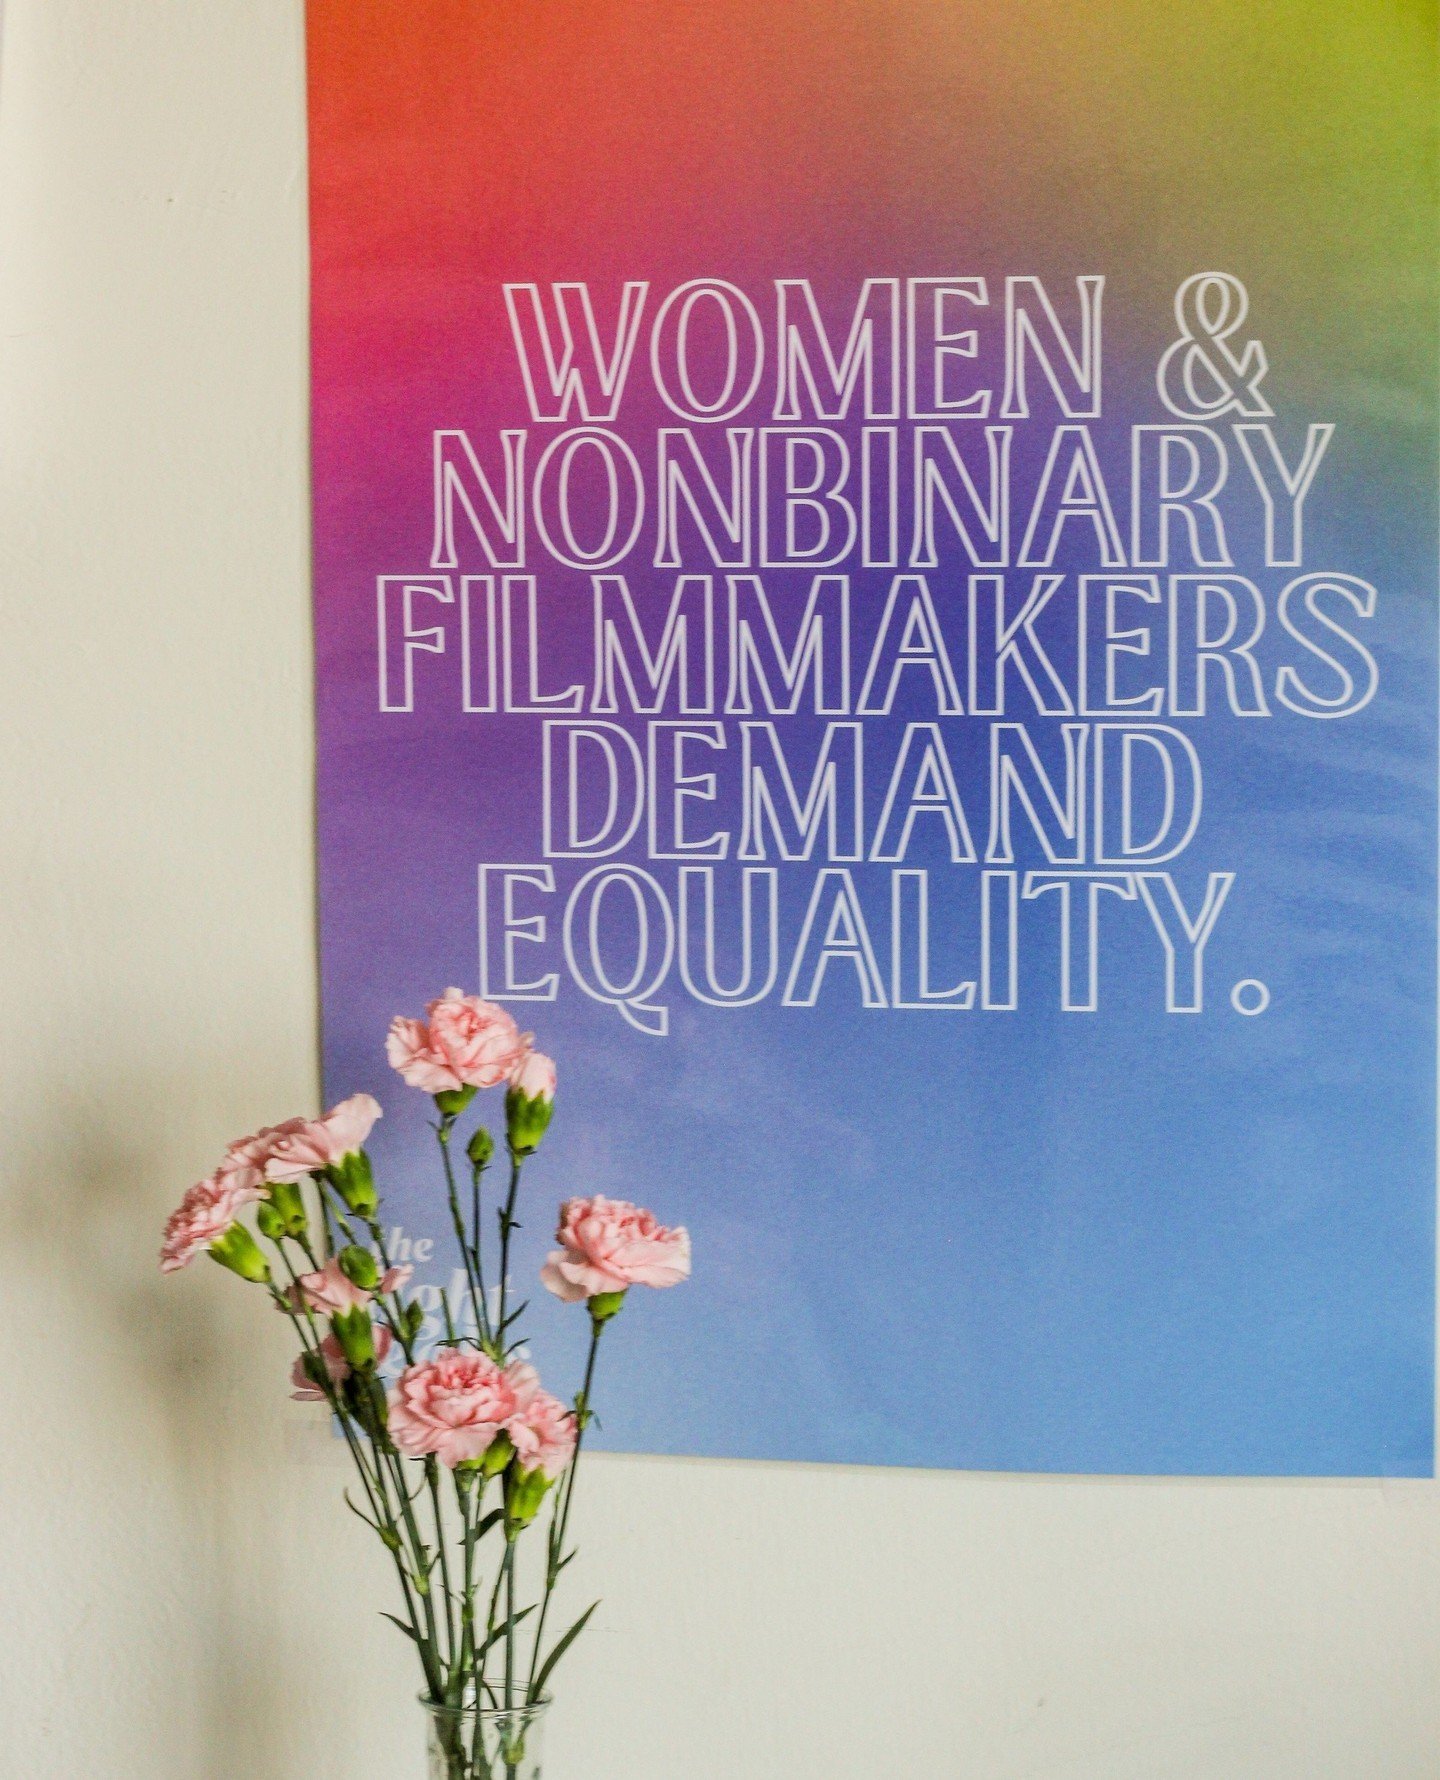 yes we do 👏⁠
⁠
join us in our mission to uplift and empower female and gender non-conforming (GNC) filmmakers! we're dedicated to providing a platform for rising filmmakers worldwide to showcase their talent, connect with peers, and expand their ski